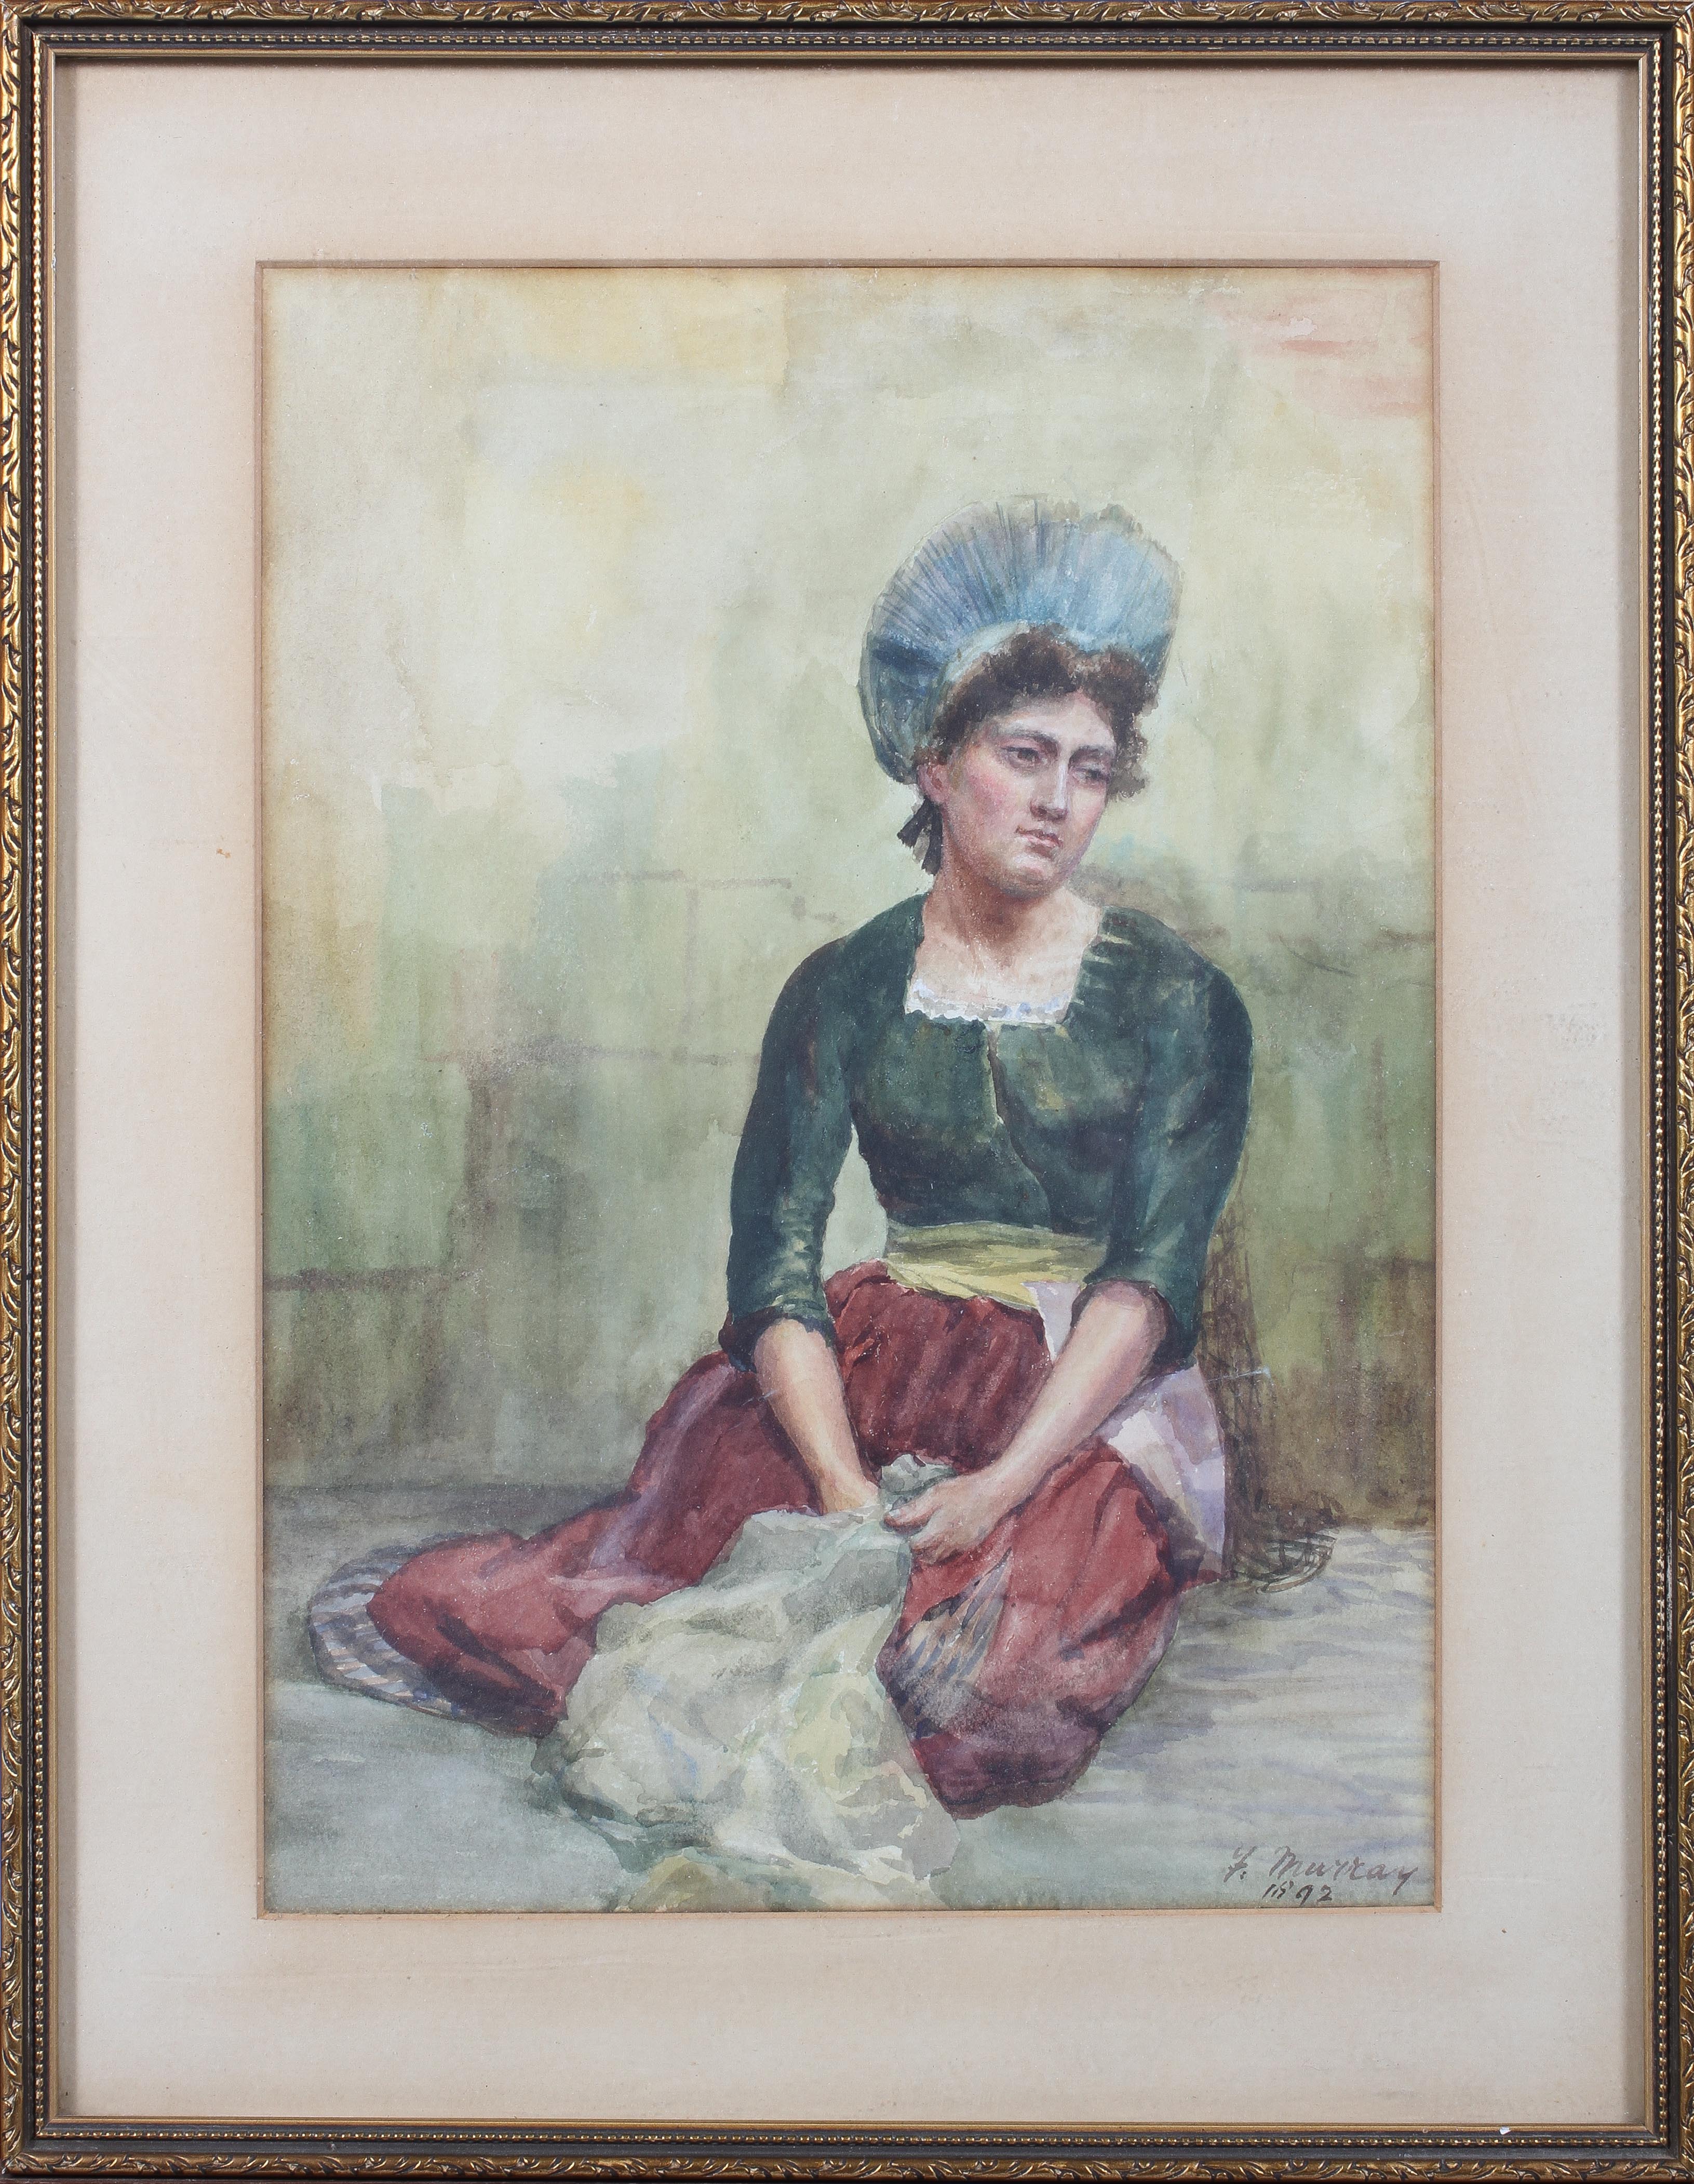 F Murray, watercolour, portrait of a woman in regional dress, signed lower right, dated 1892, - Image 2 of 4